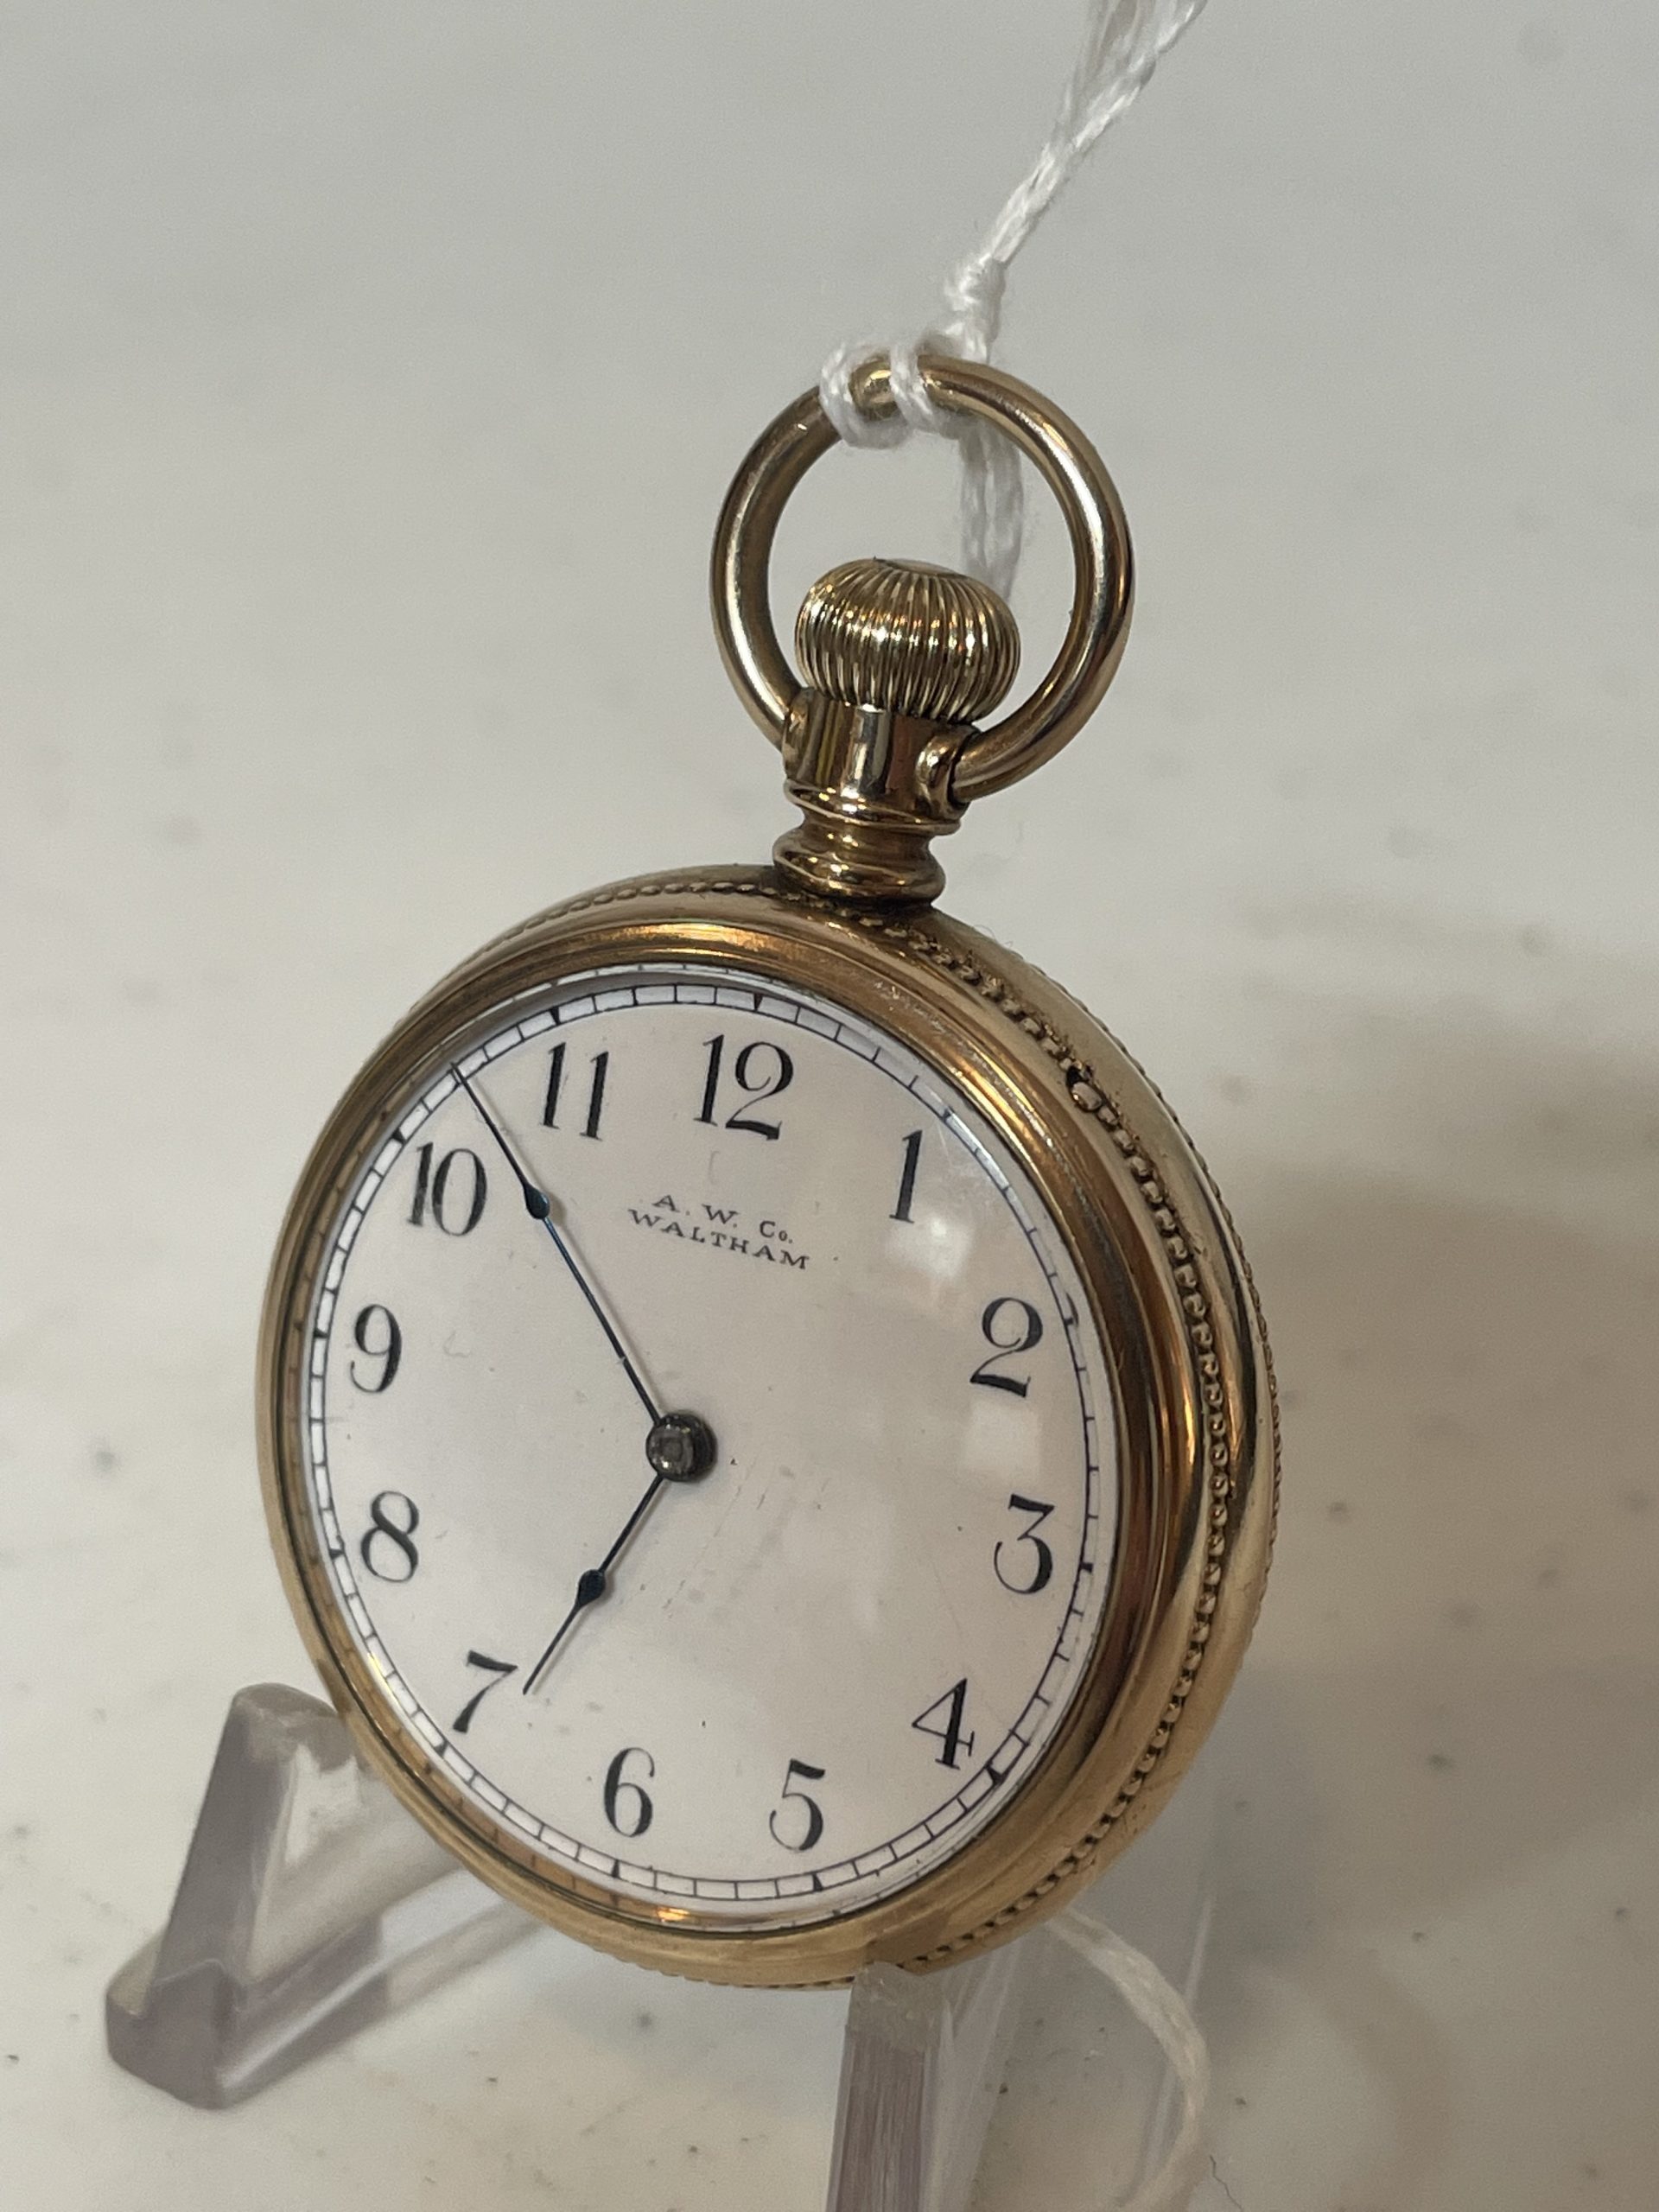 Waltham 6s Open Face Gold Filled Pocket Watch – 4-4 Time